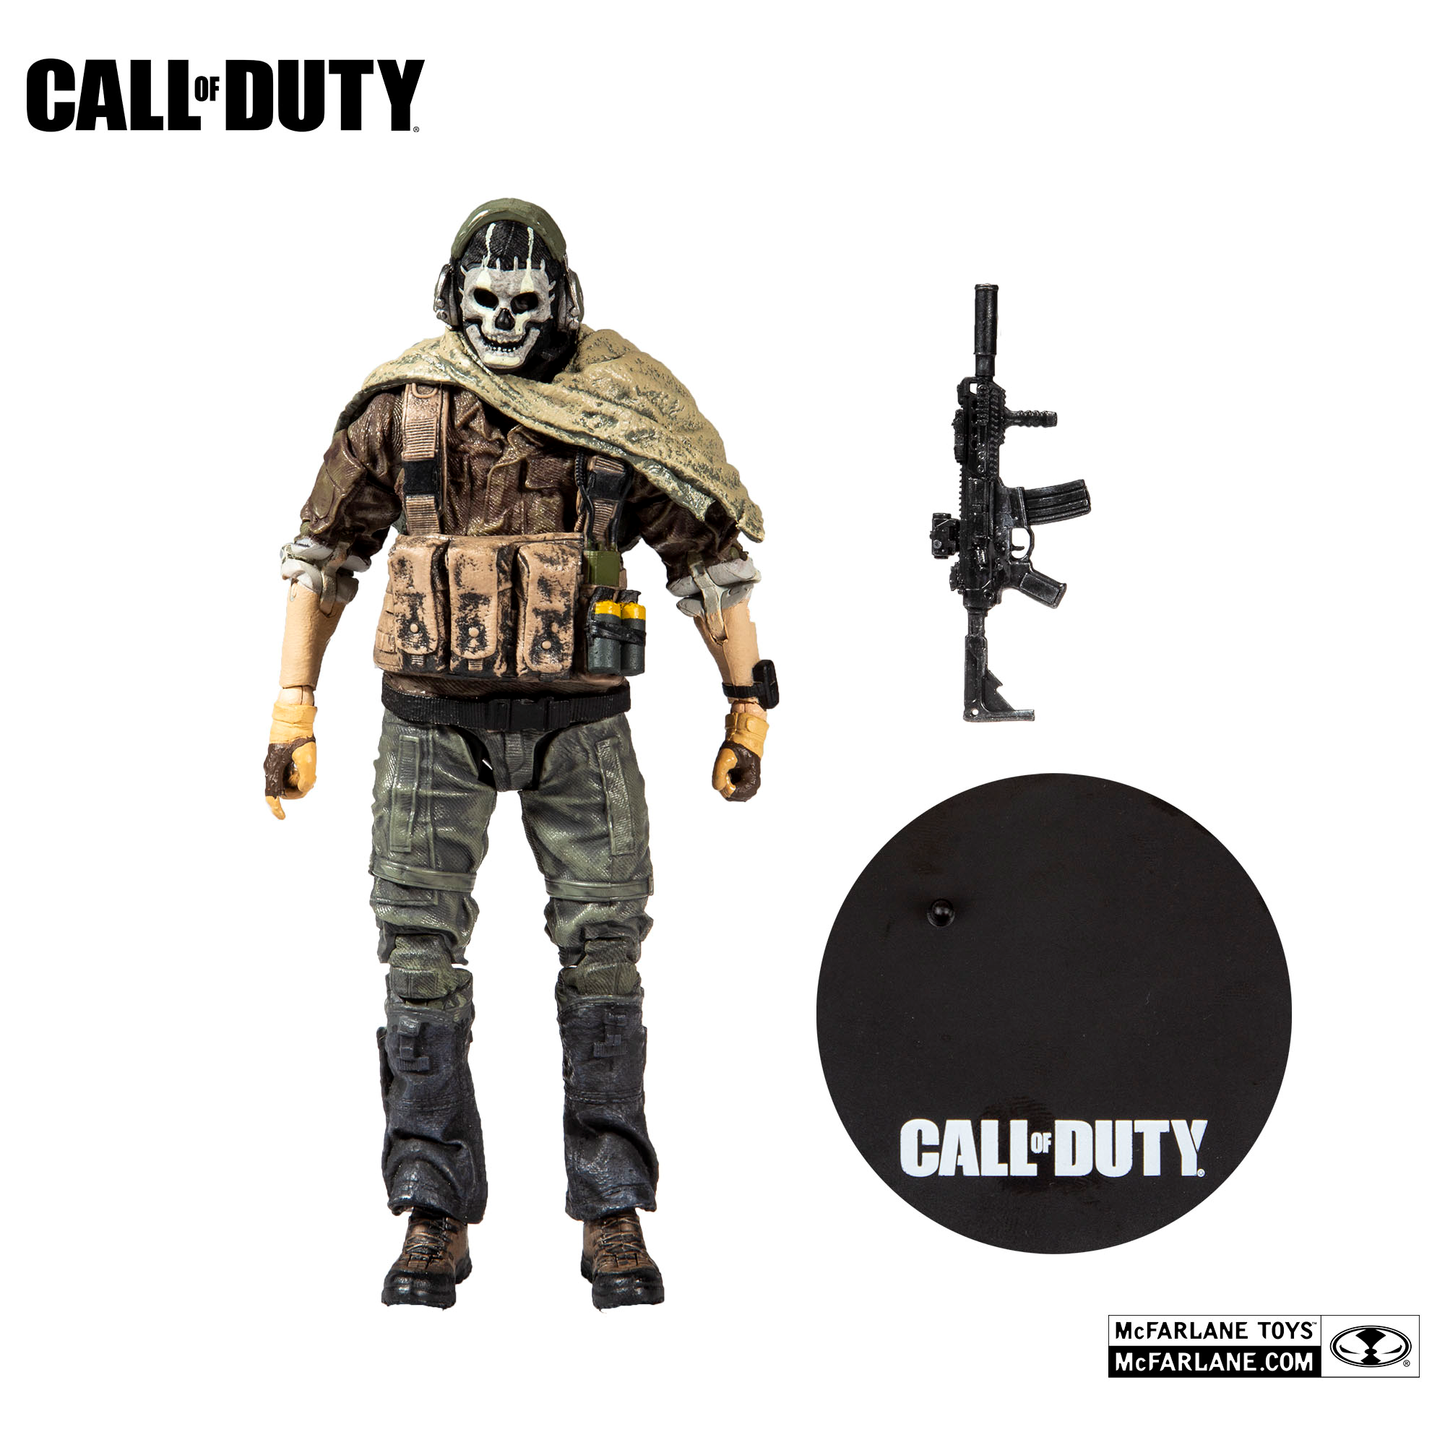 McFarlane Toys Call of Duty Ghost 2 Action Figure